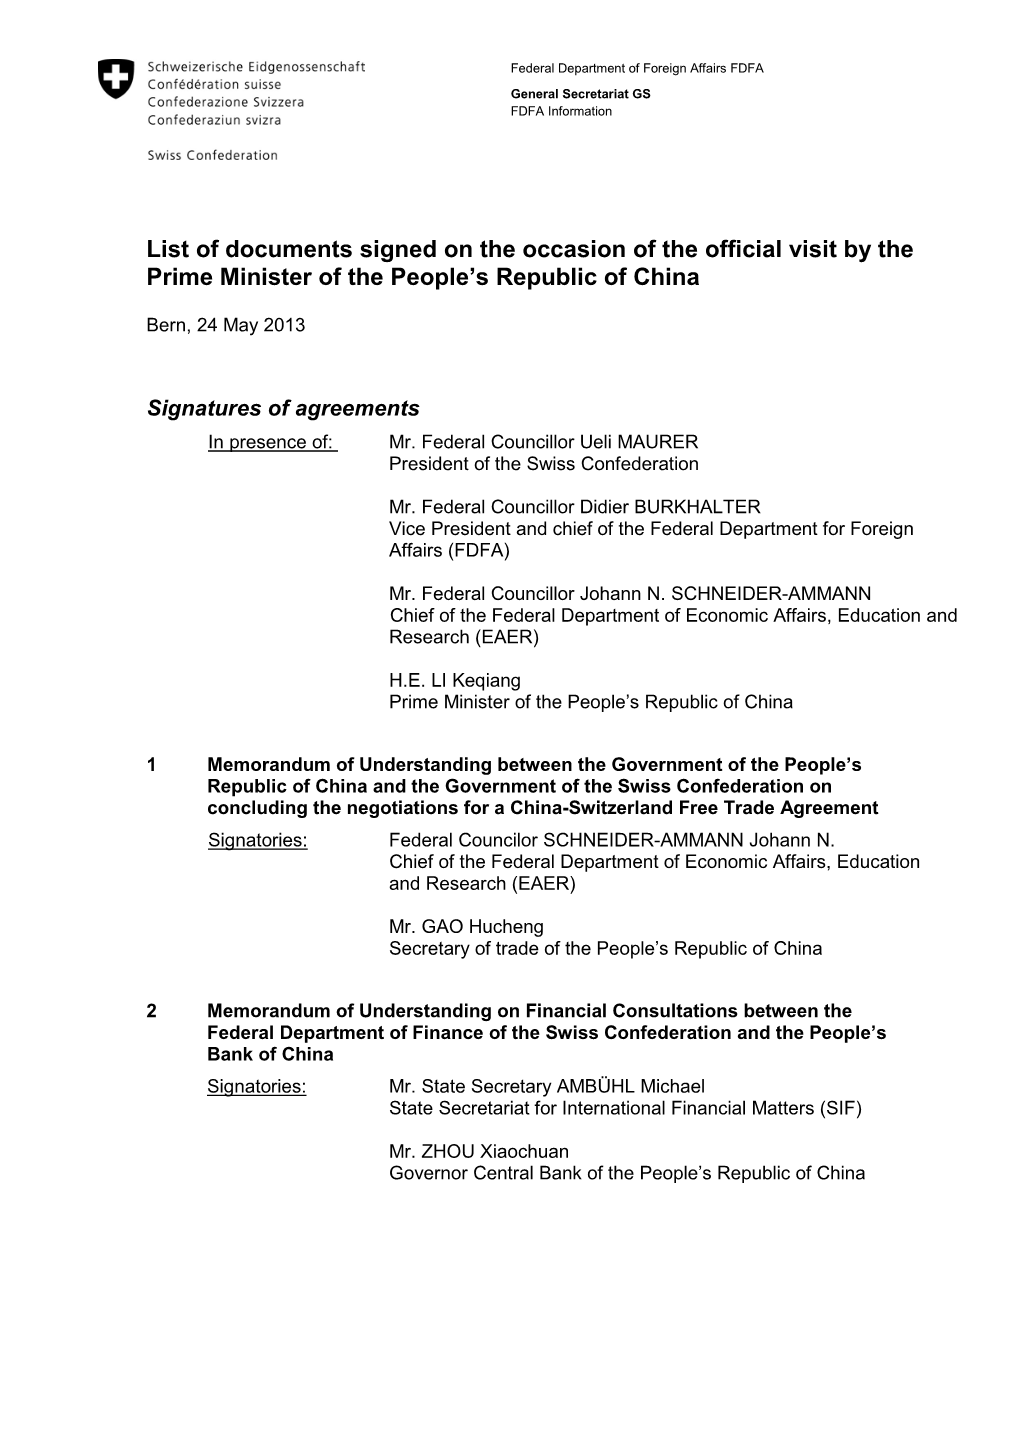 List of Documents Signed on the Occasion of the Official Visit by the Prime Minister of the People's Republic of China